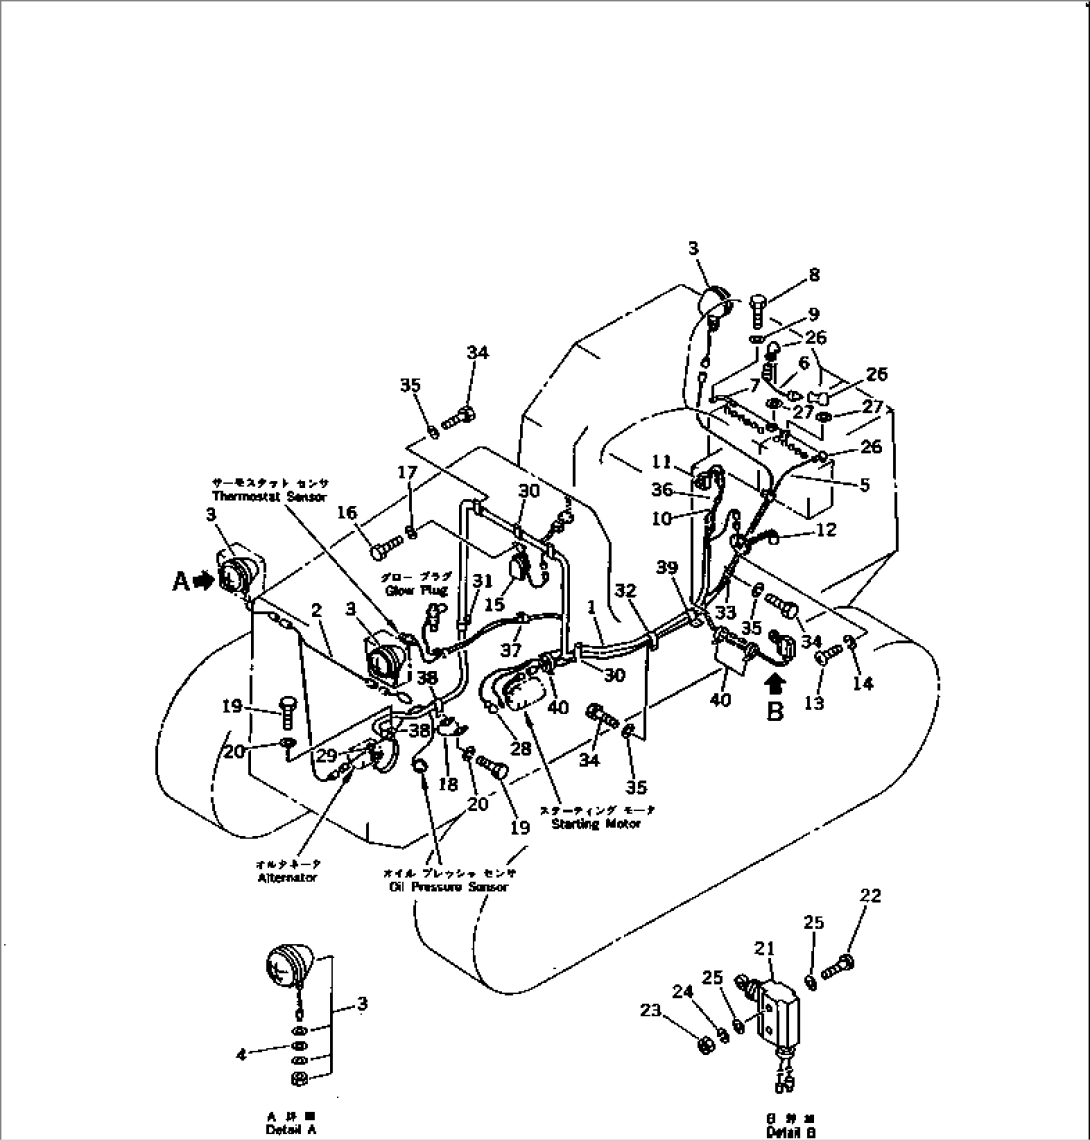 ELECTRICAL SYSTEM (FOR 15A ALTERNATOR)